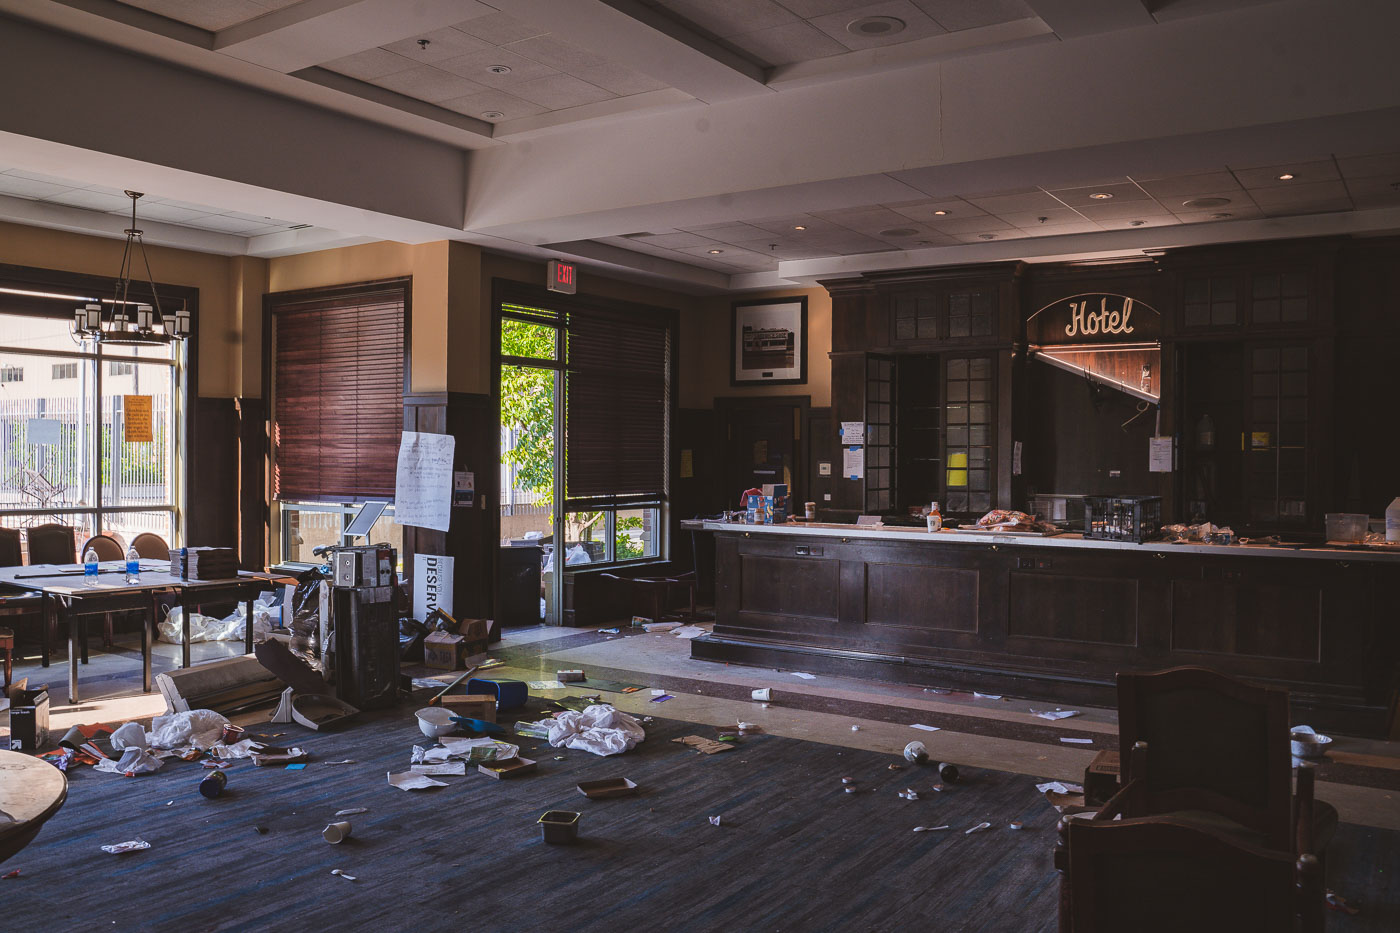 Destroyed lobby area of Sheraton Hotel in Minneapolis.